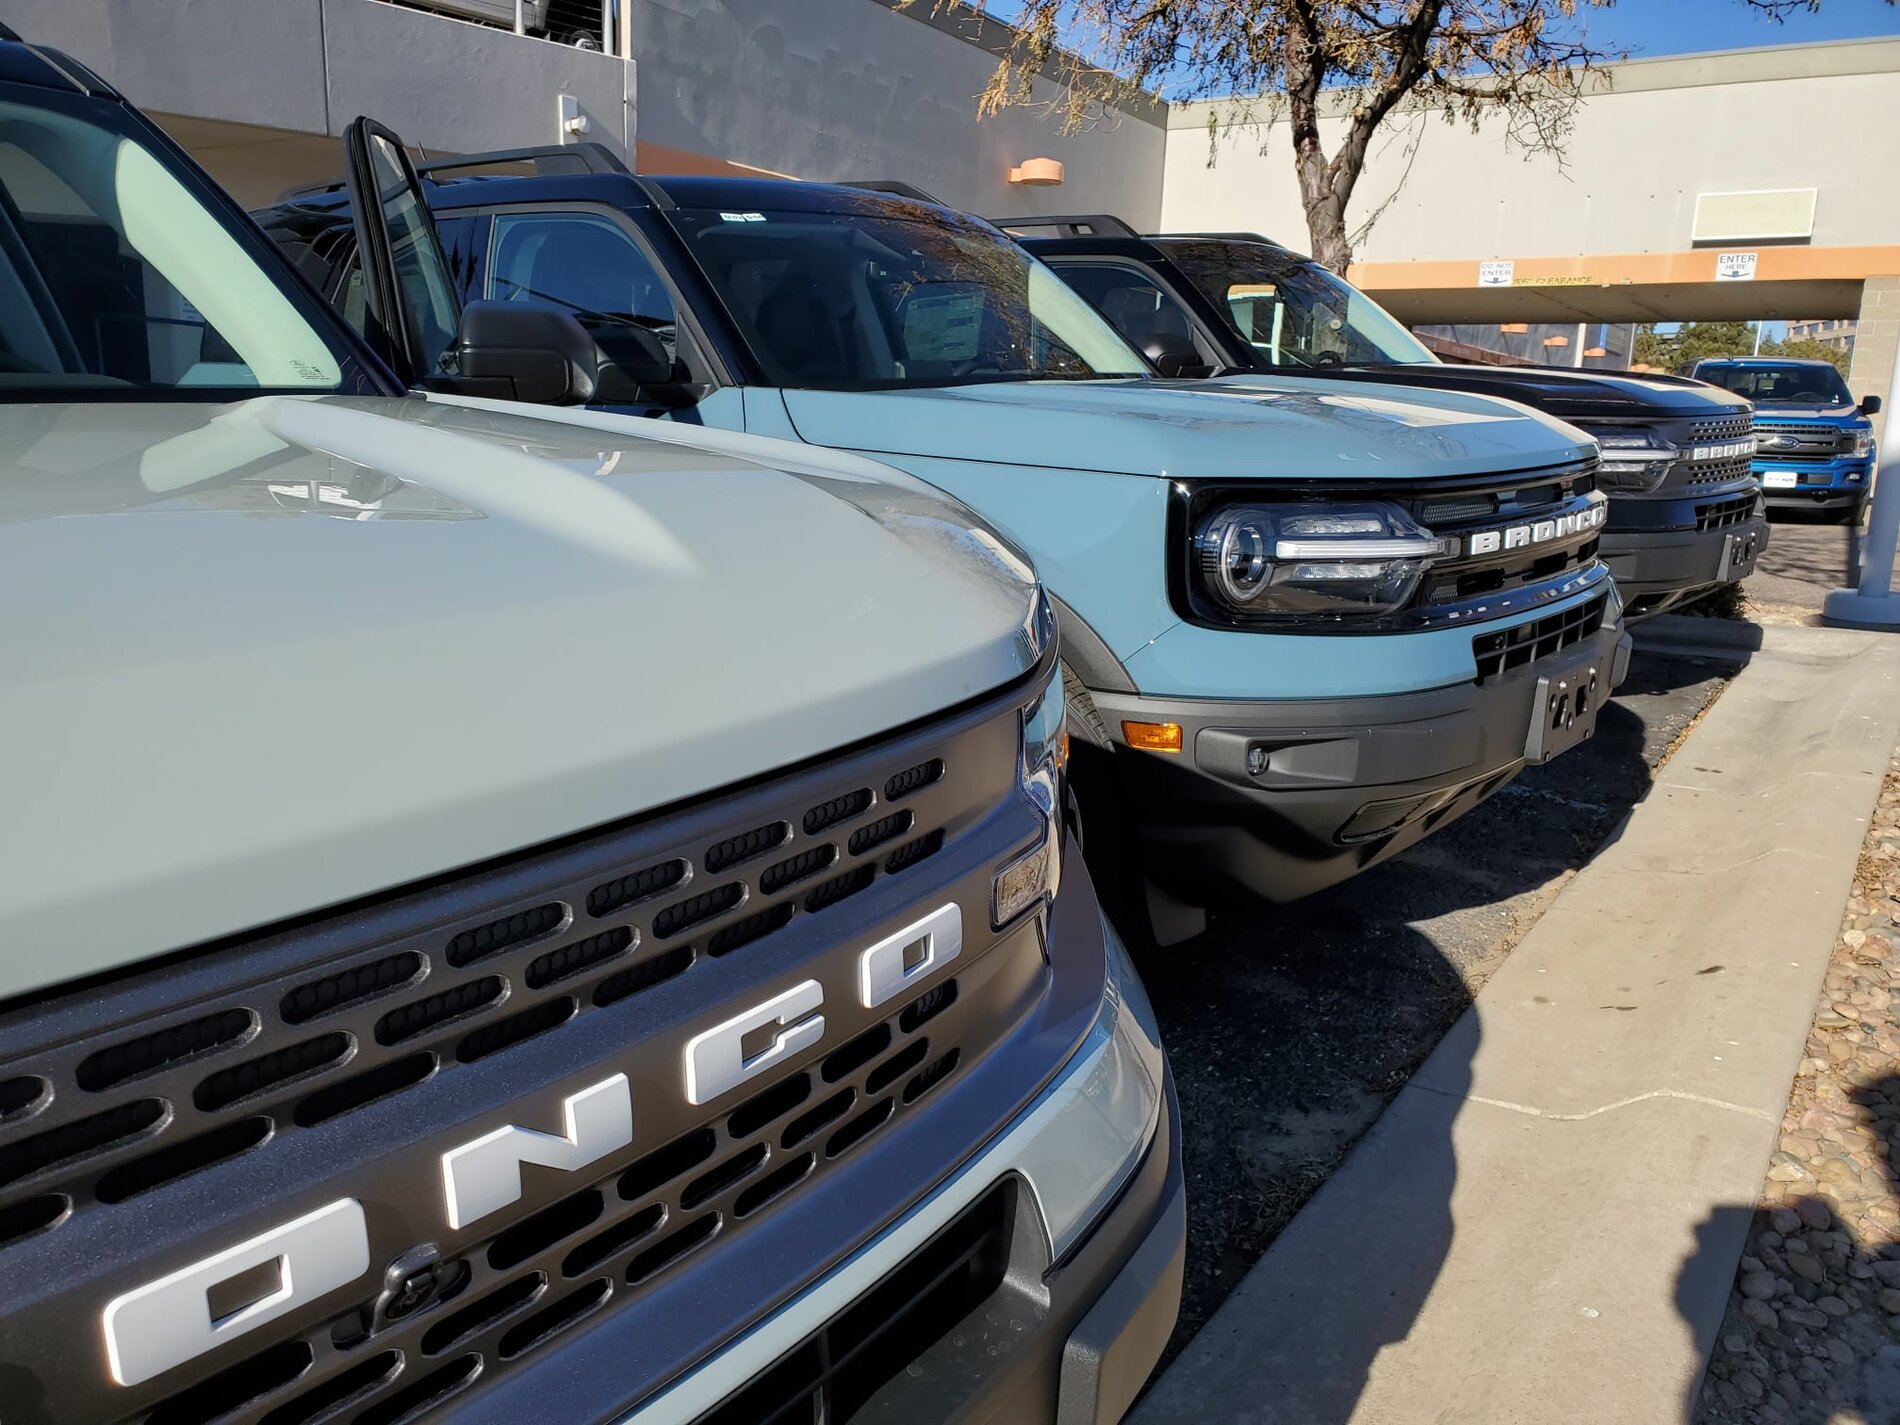 Ford Bronco Area 51 vs Cactus Gray side-by-side comparison (on Sport) 082120_10224792992560852_1262010017780743773_o-